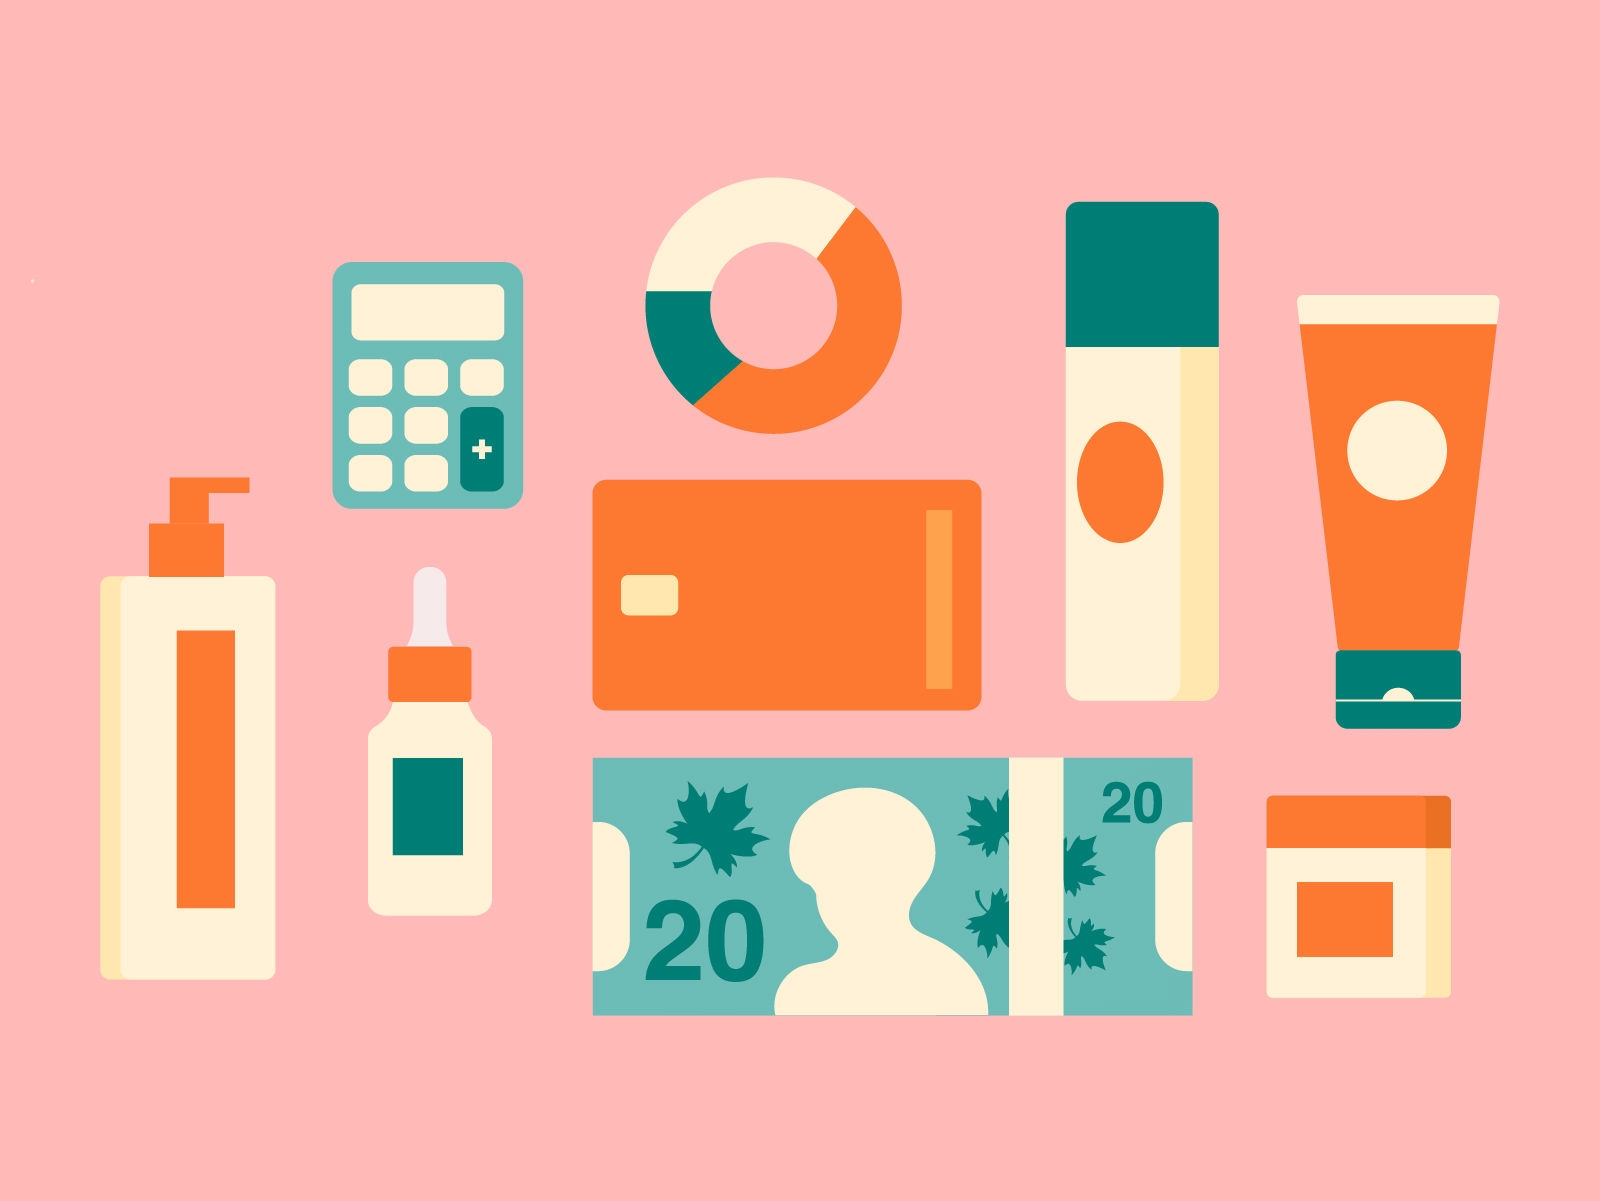 Illustration of several self-care products (creams, lotions, etc.) alongside financial items including a credit card and a $20 bill.